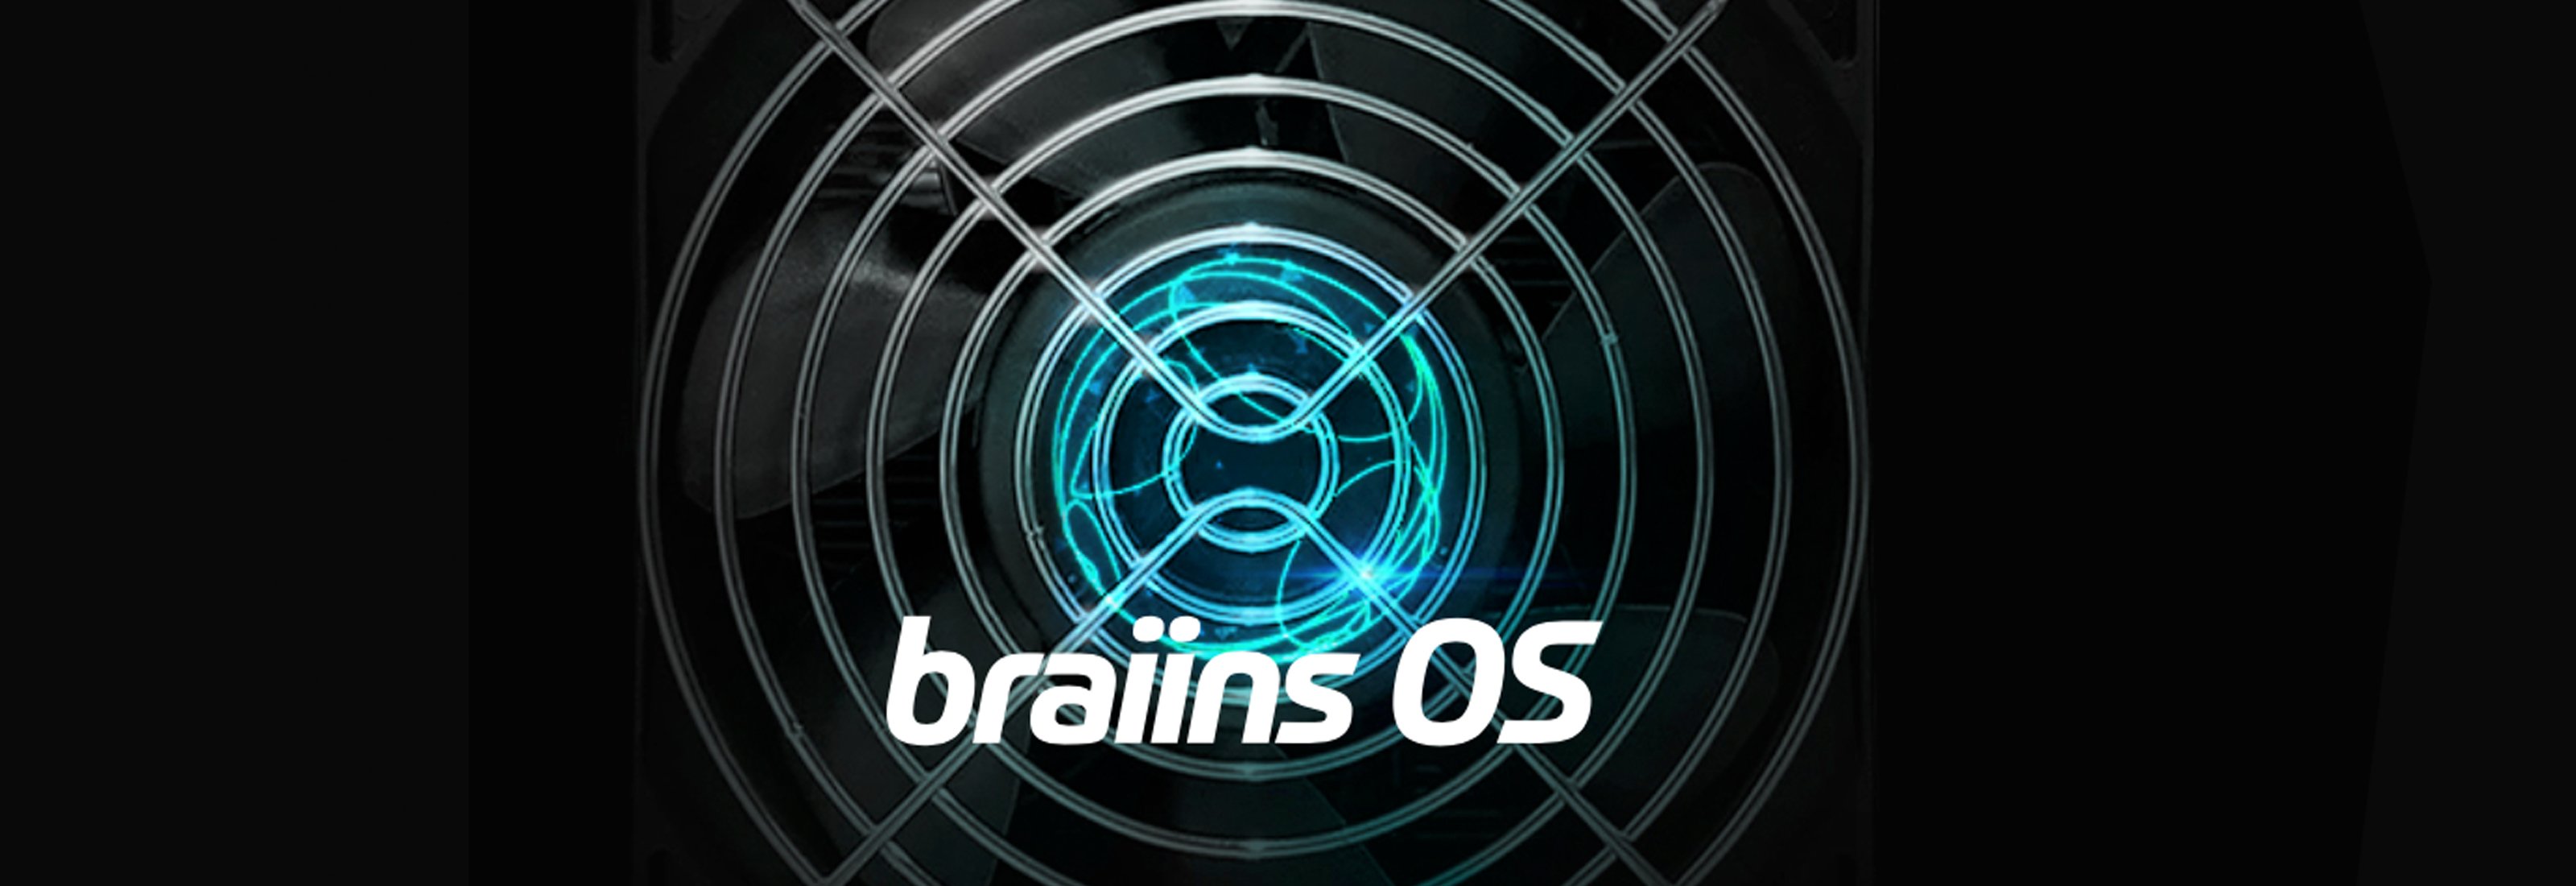 Braiins OS Publishes Open Source Firmware for Mining Rigs 